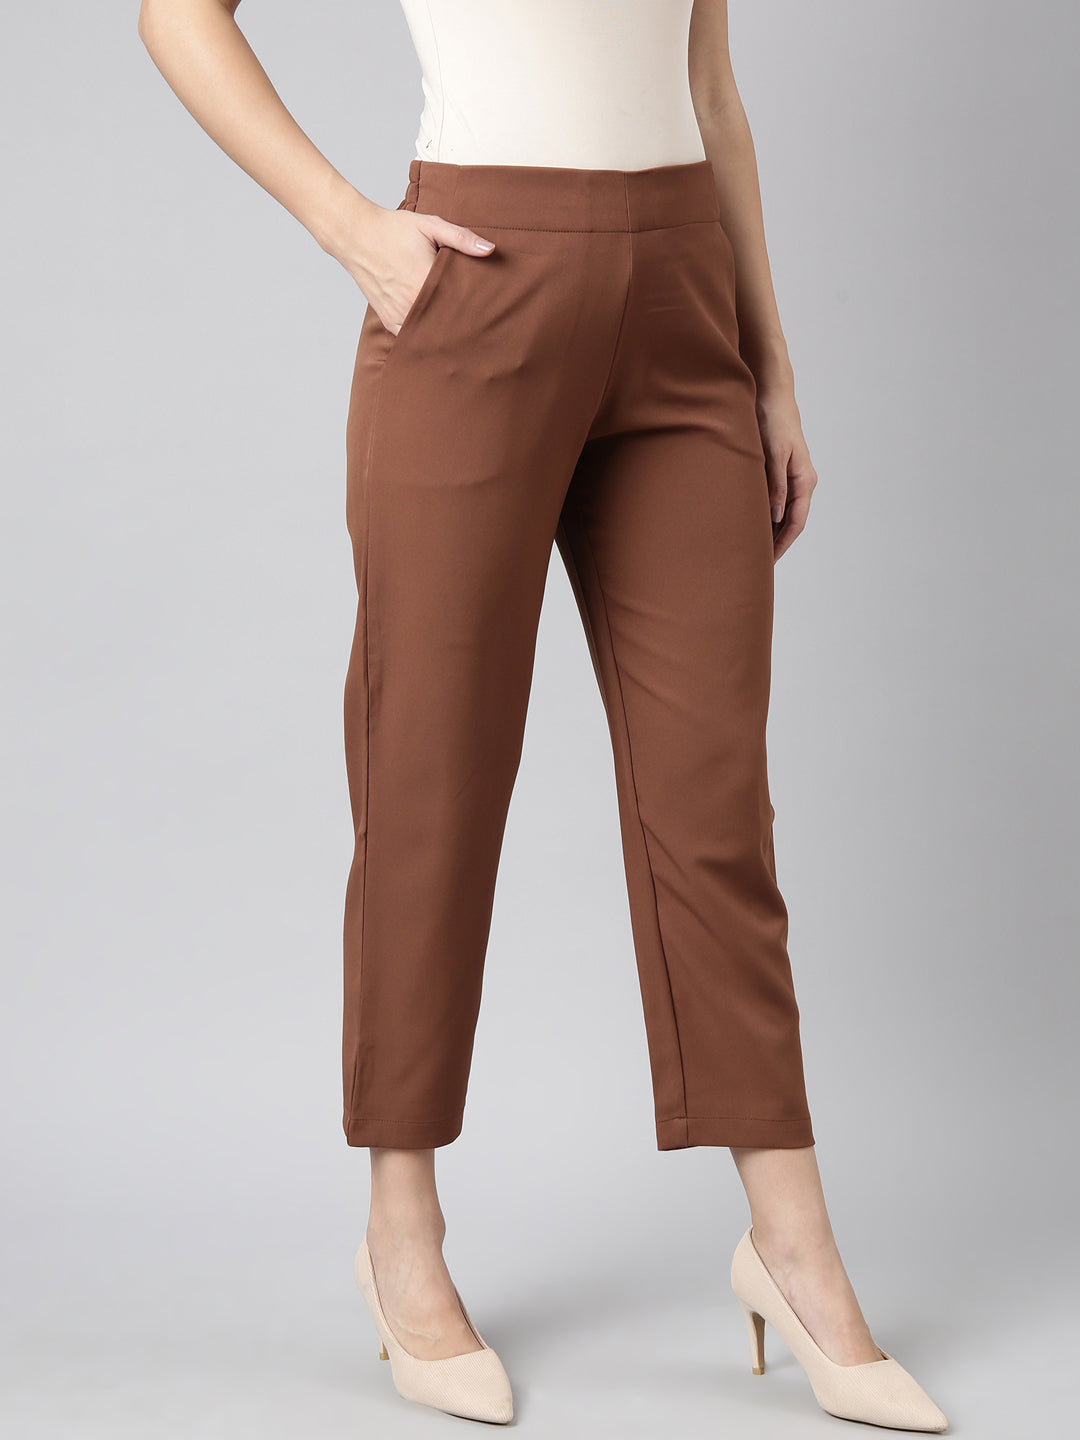 Women Solid Brown Formal Trousers